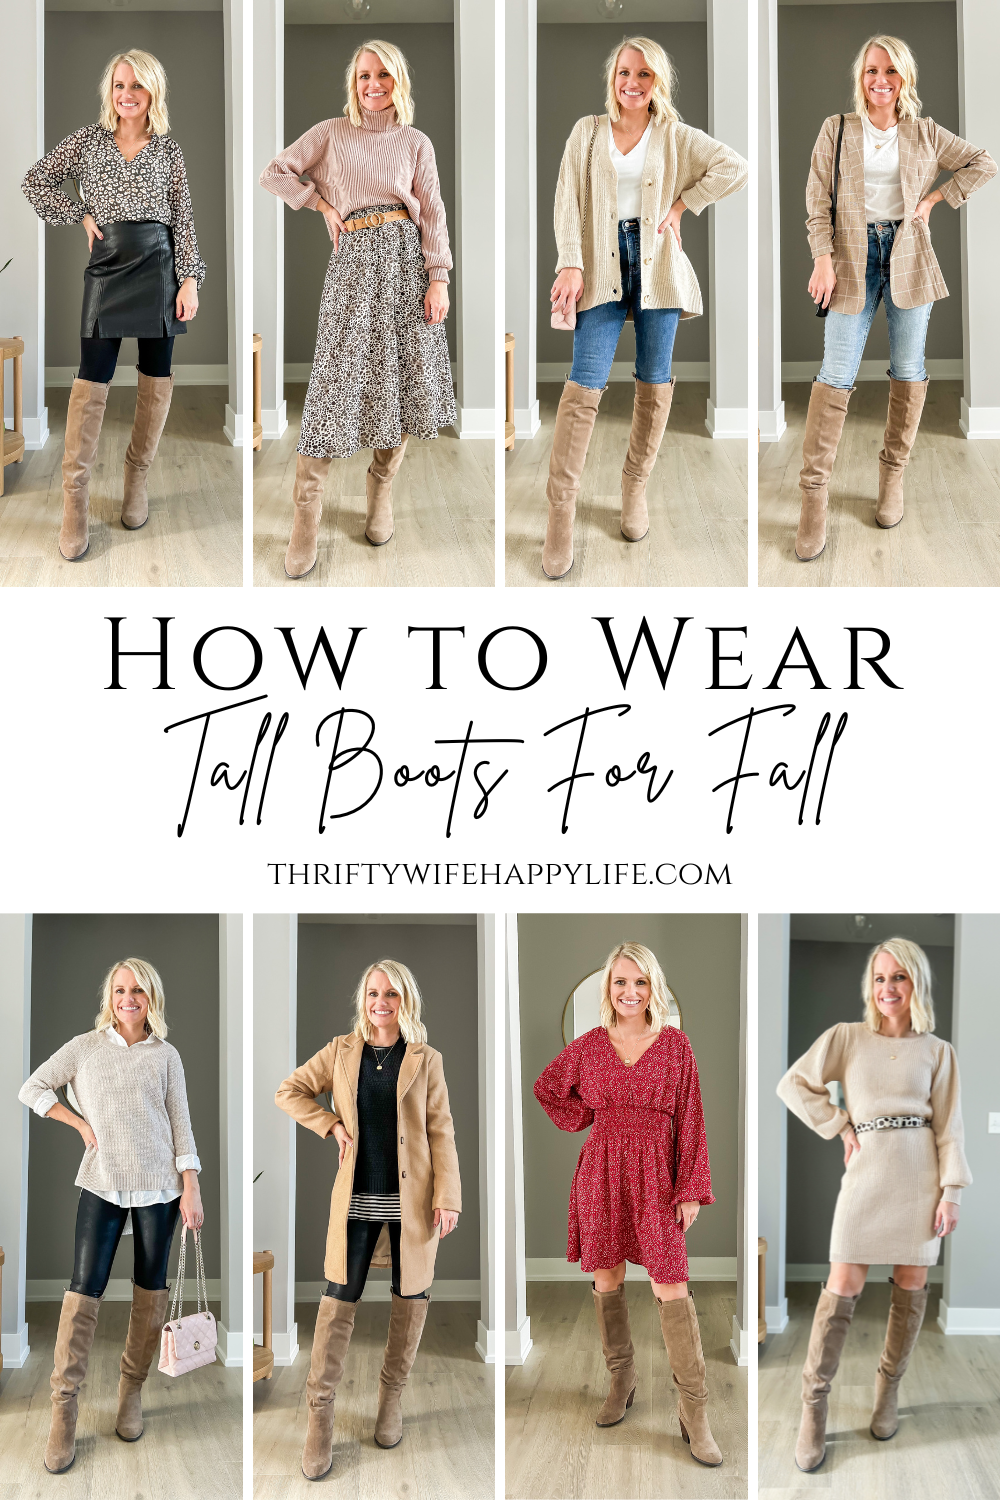 How to Wear Tall Boots This Fall - Thrifty Wife Happy Life